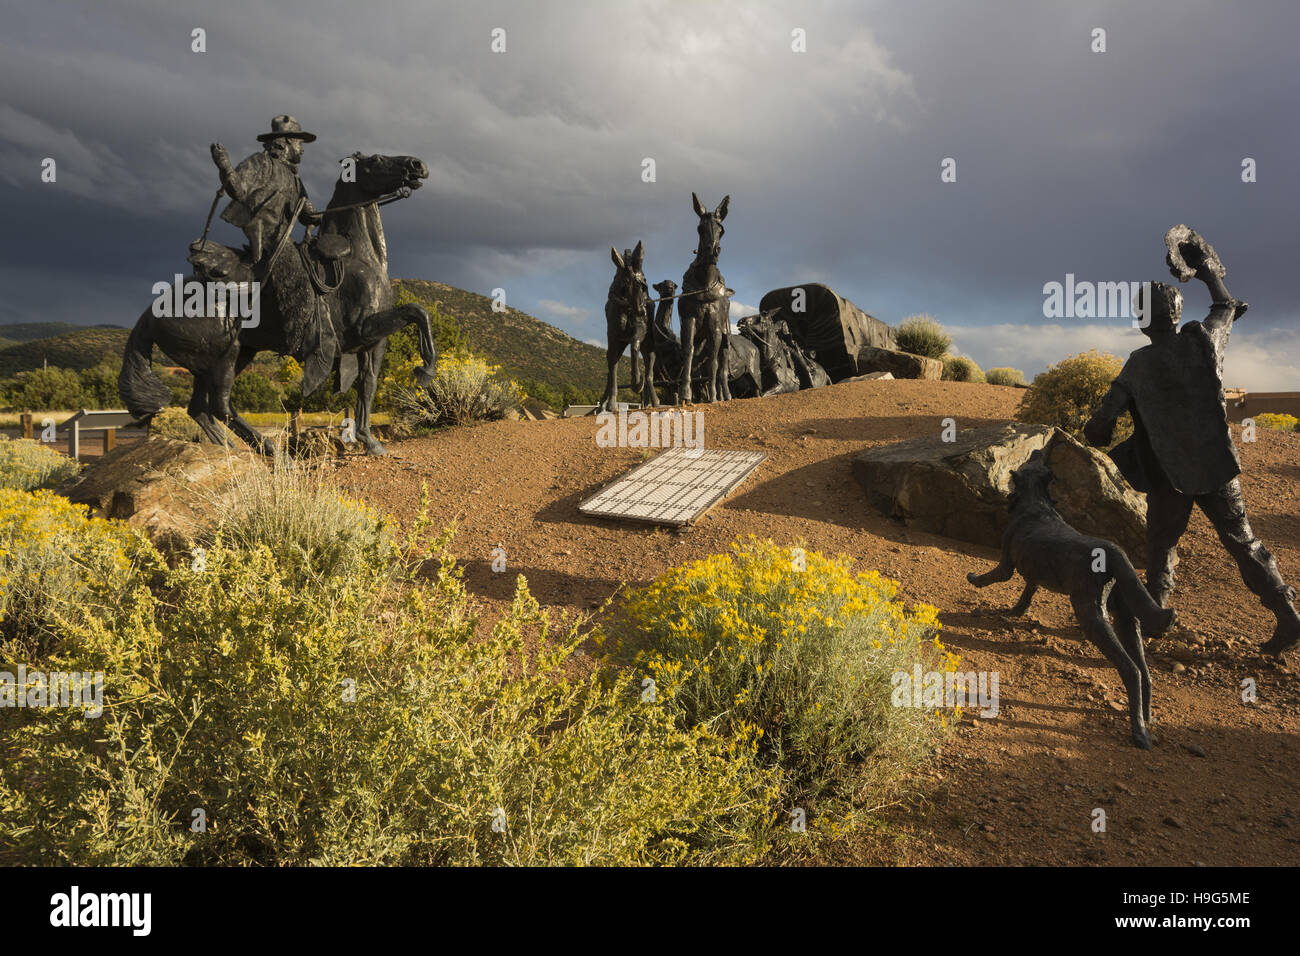 New Mexico, Santa Fe, Museum Hill, Journey's End sculpture Stock Photo